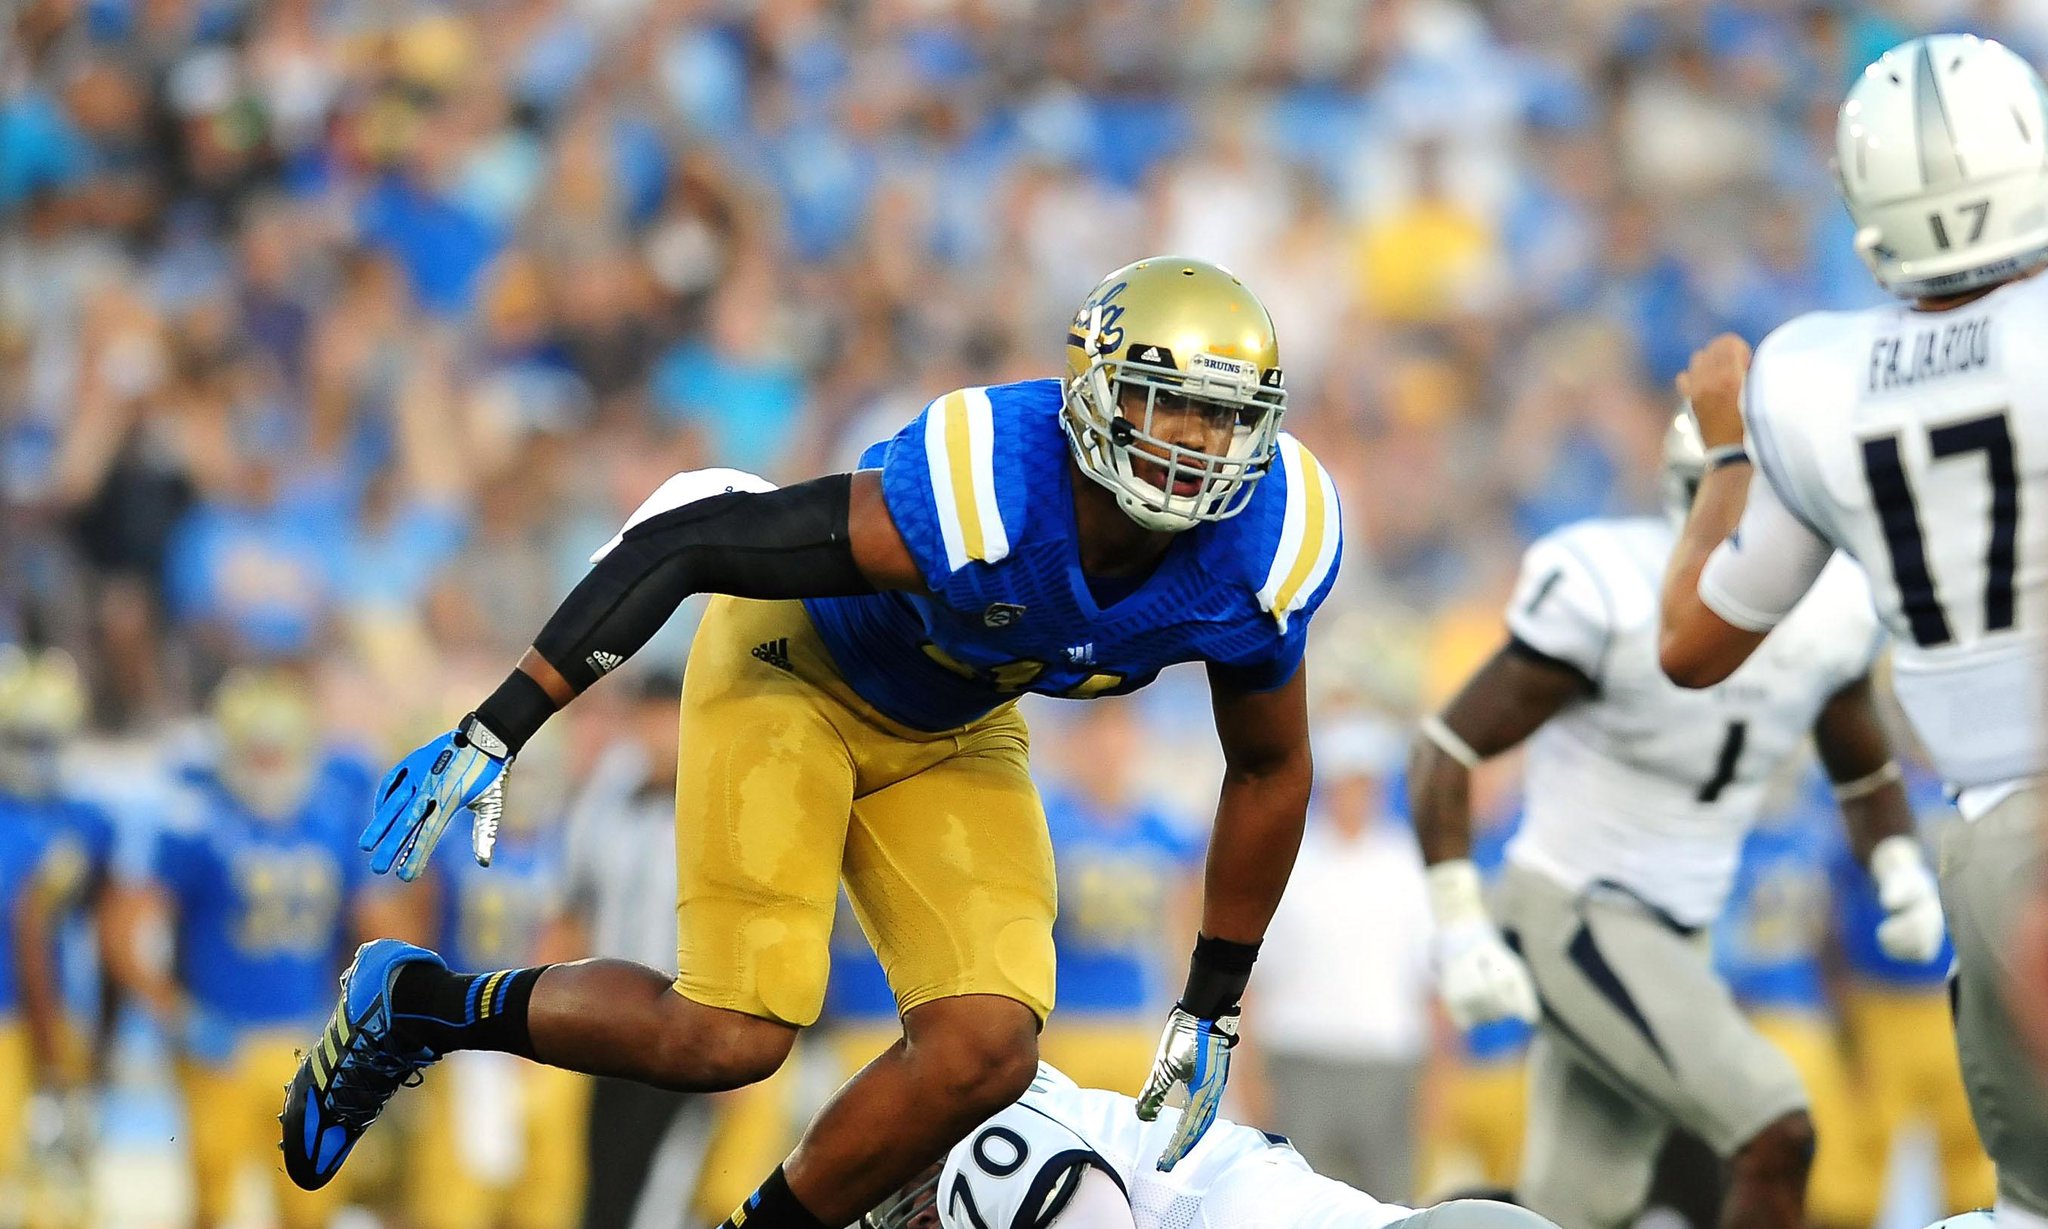 Happy 23rd birthday to the one and only Anthony Barr! Congratulations 